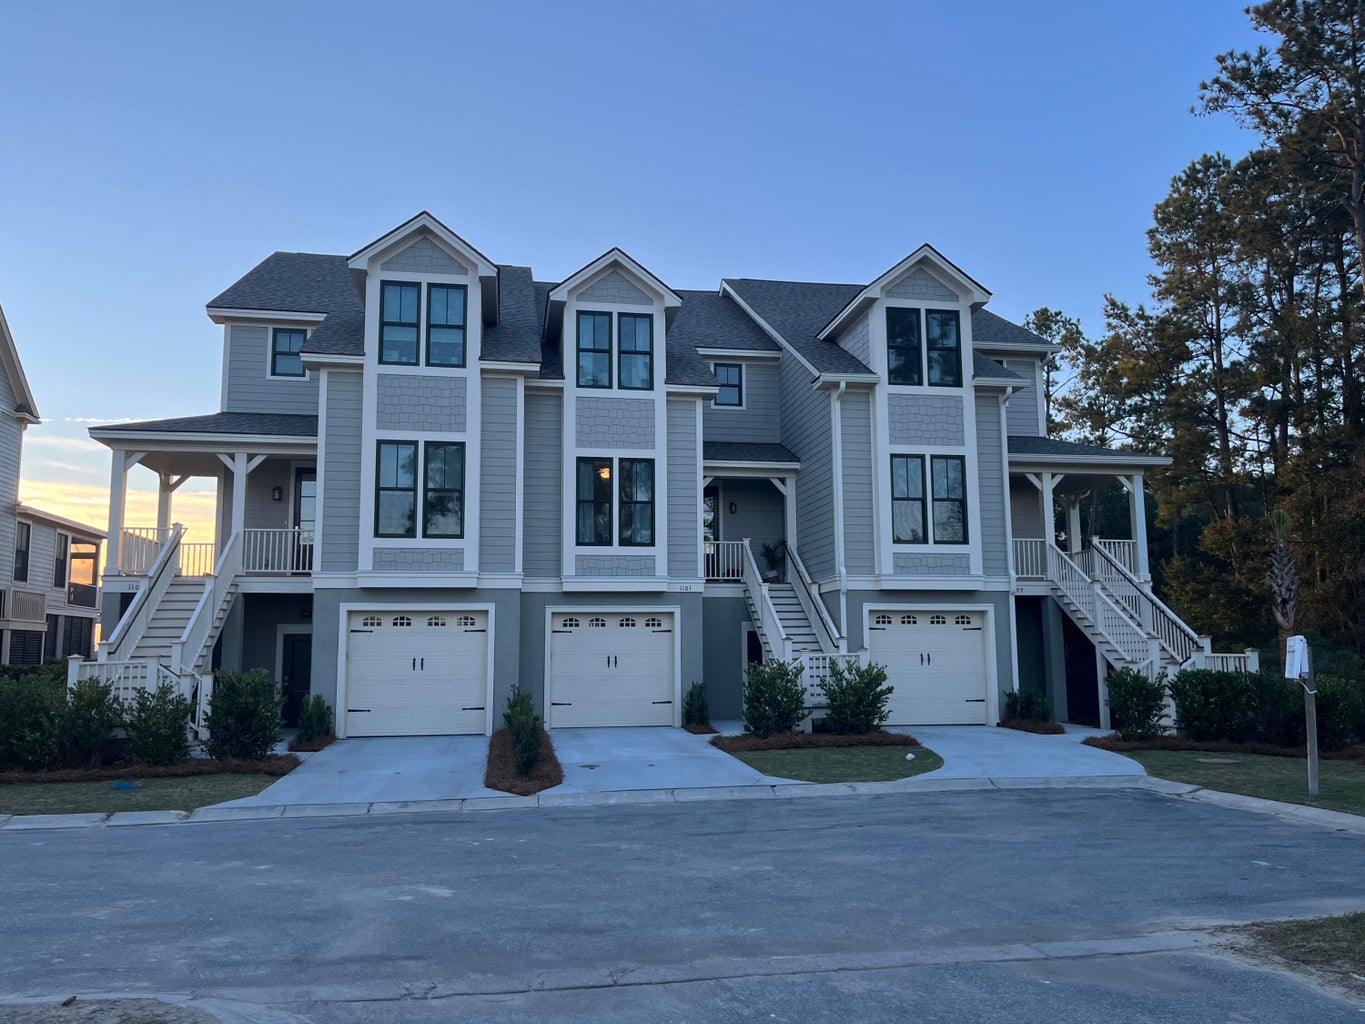 townhouses for sale Charleston sc in west ashley